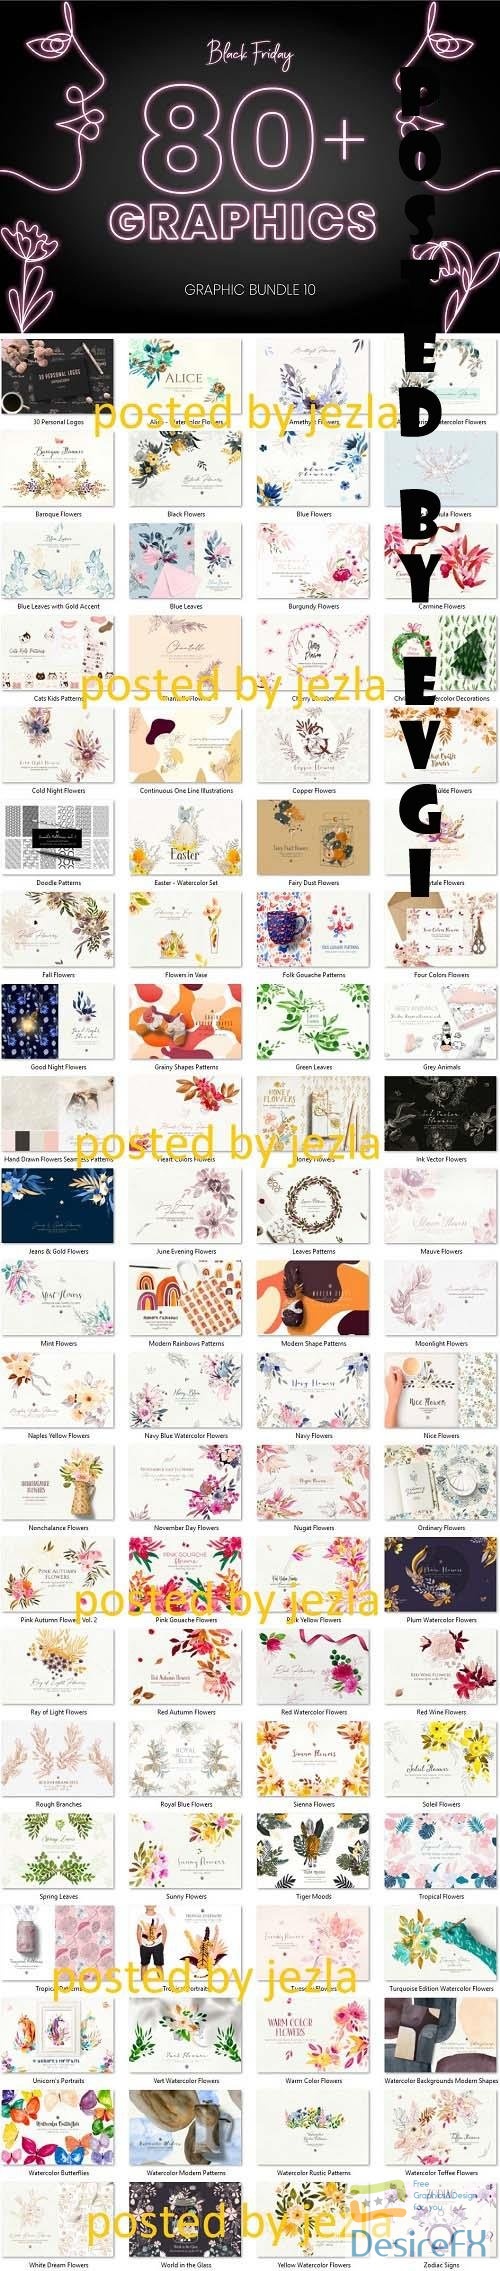 Black Friday Graphic Bundle 10 - Flowers, Decorations, Seamless Patterns